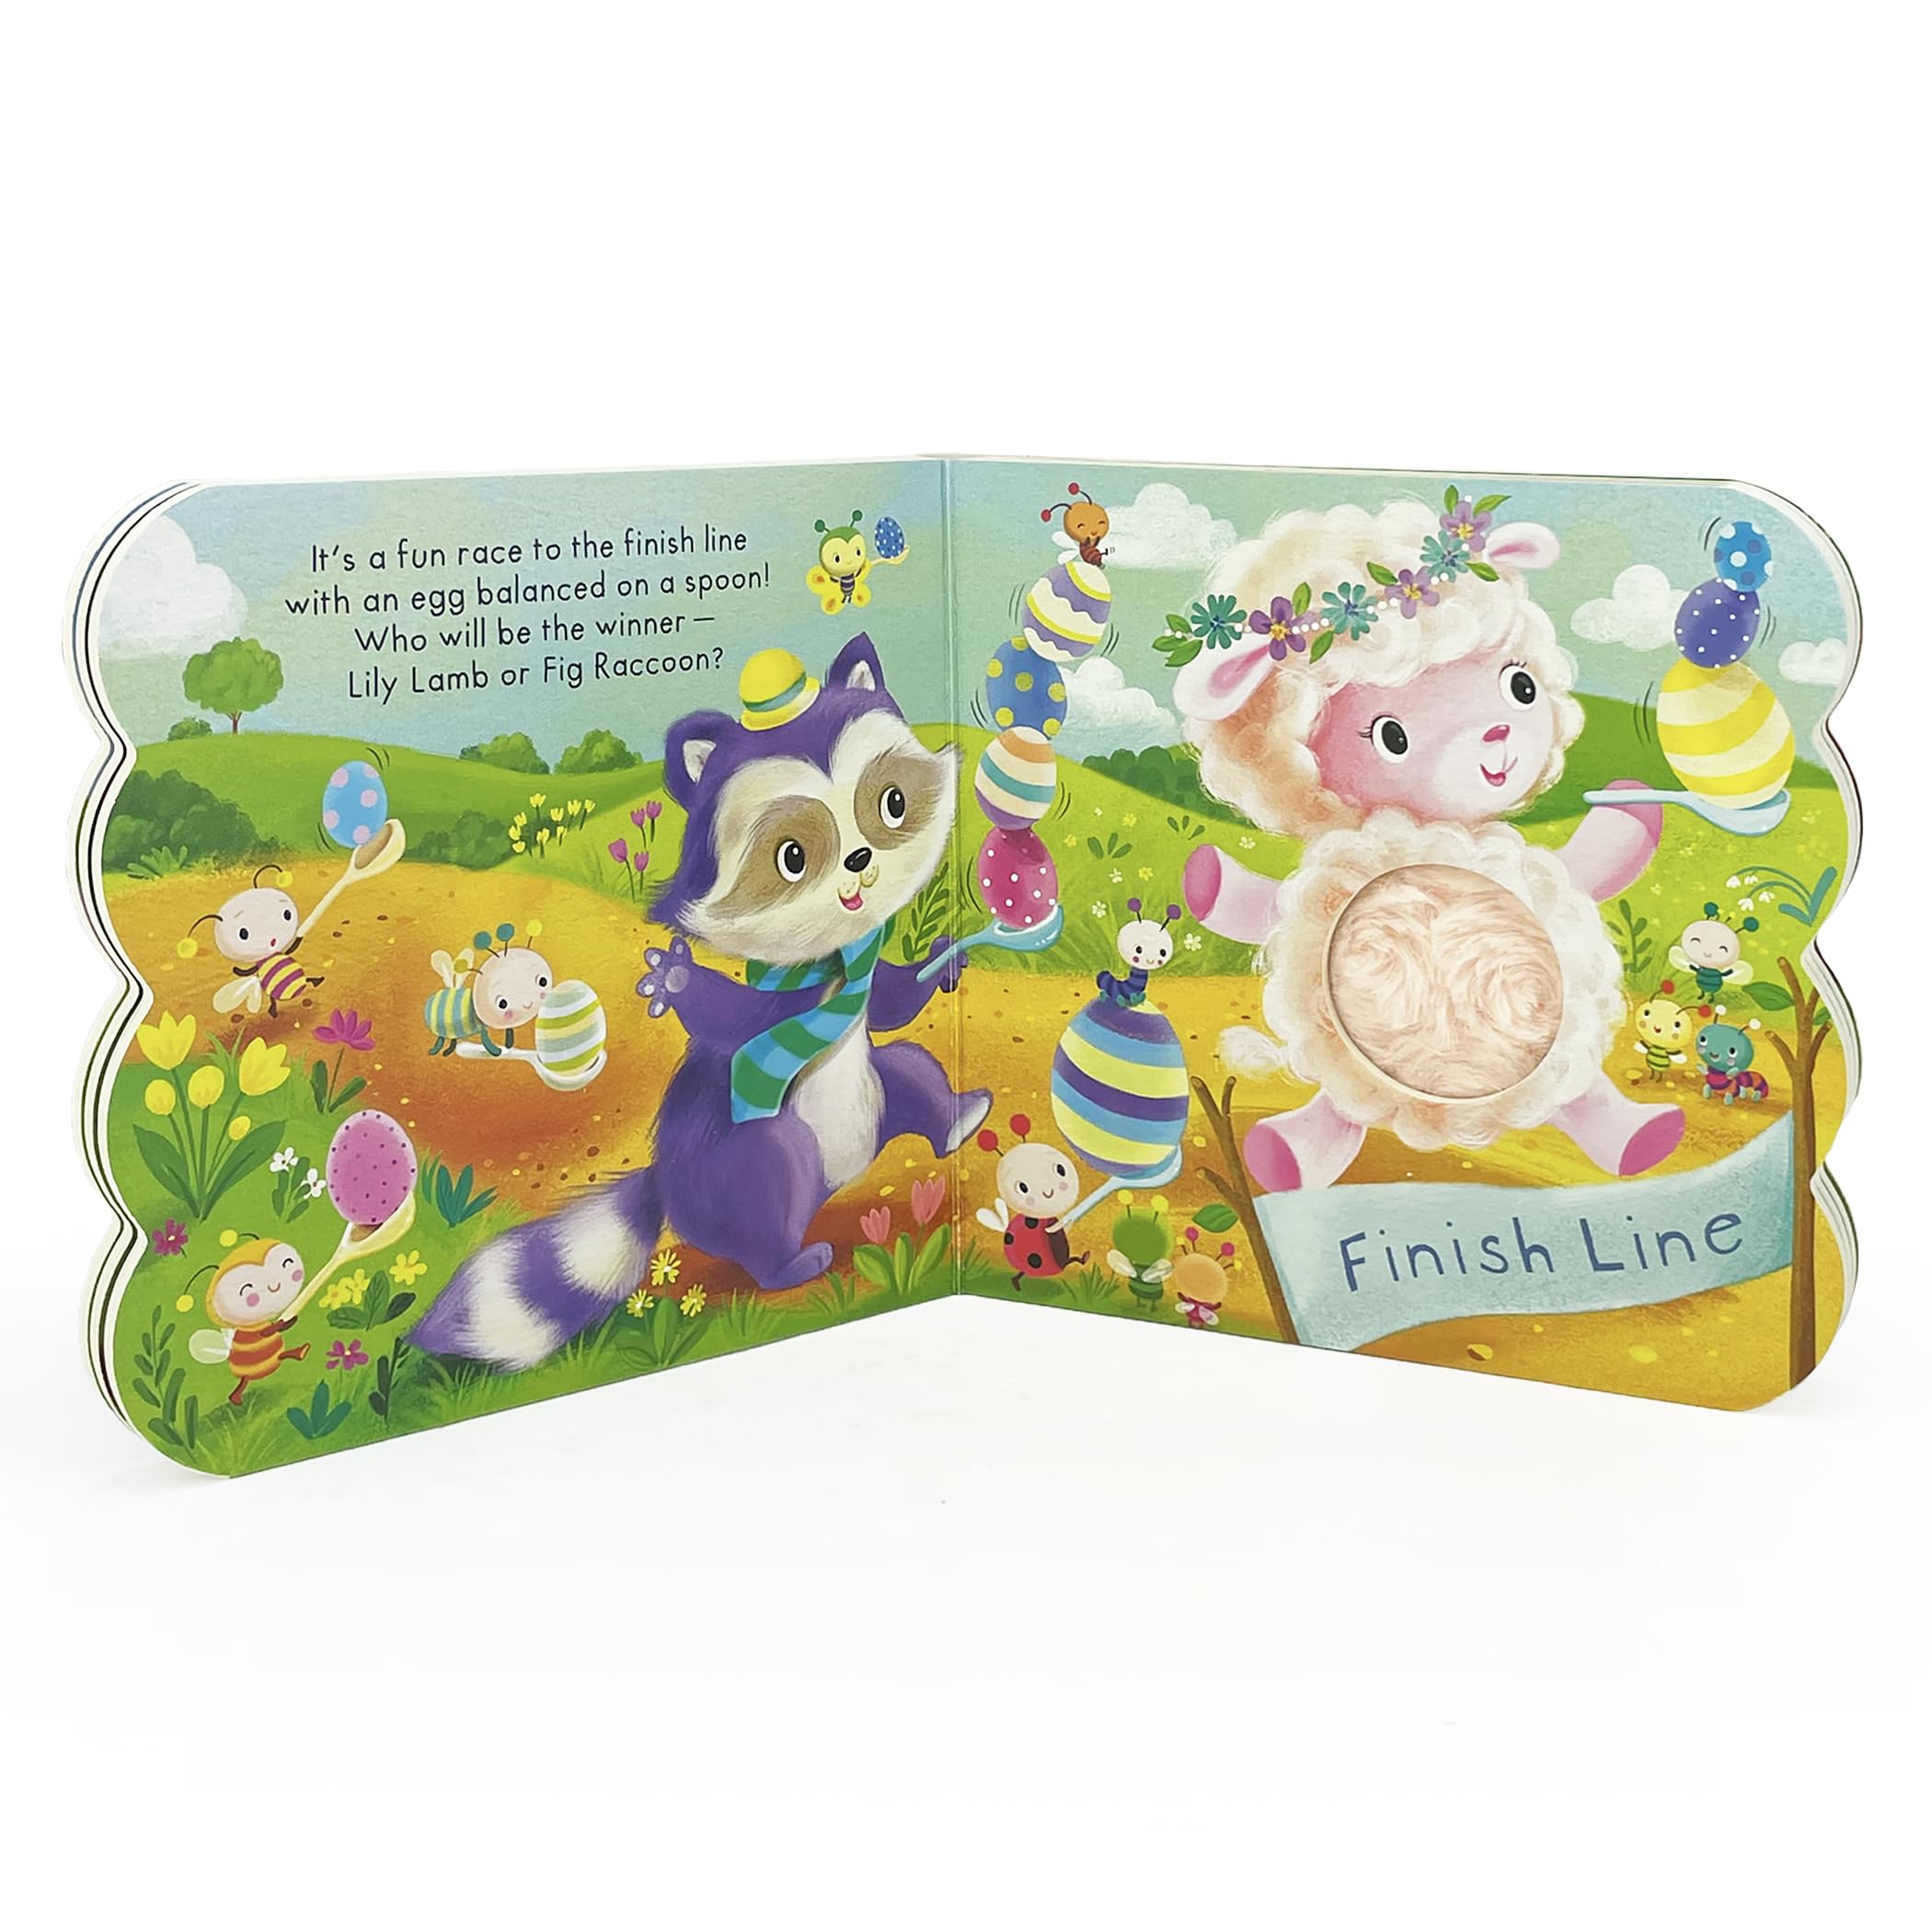 Touch & Feel: Easter on Cuddlebug Lane: Baby & Toddler Touch and Feel Sensory Board Book